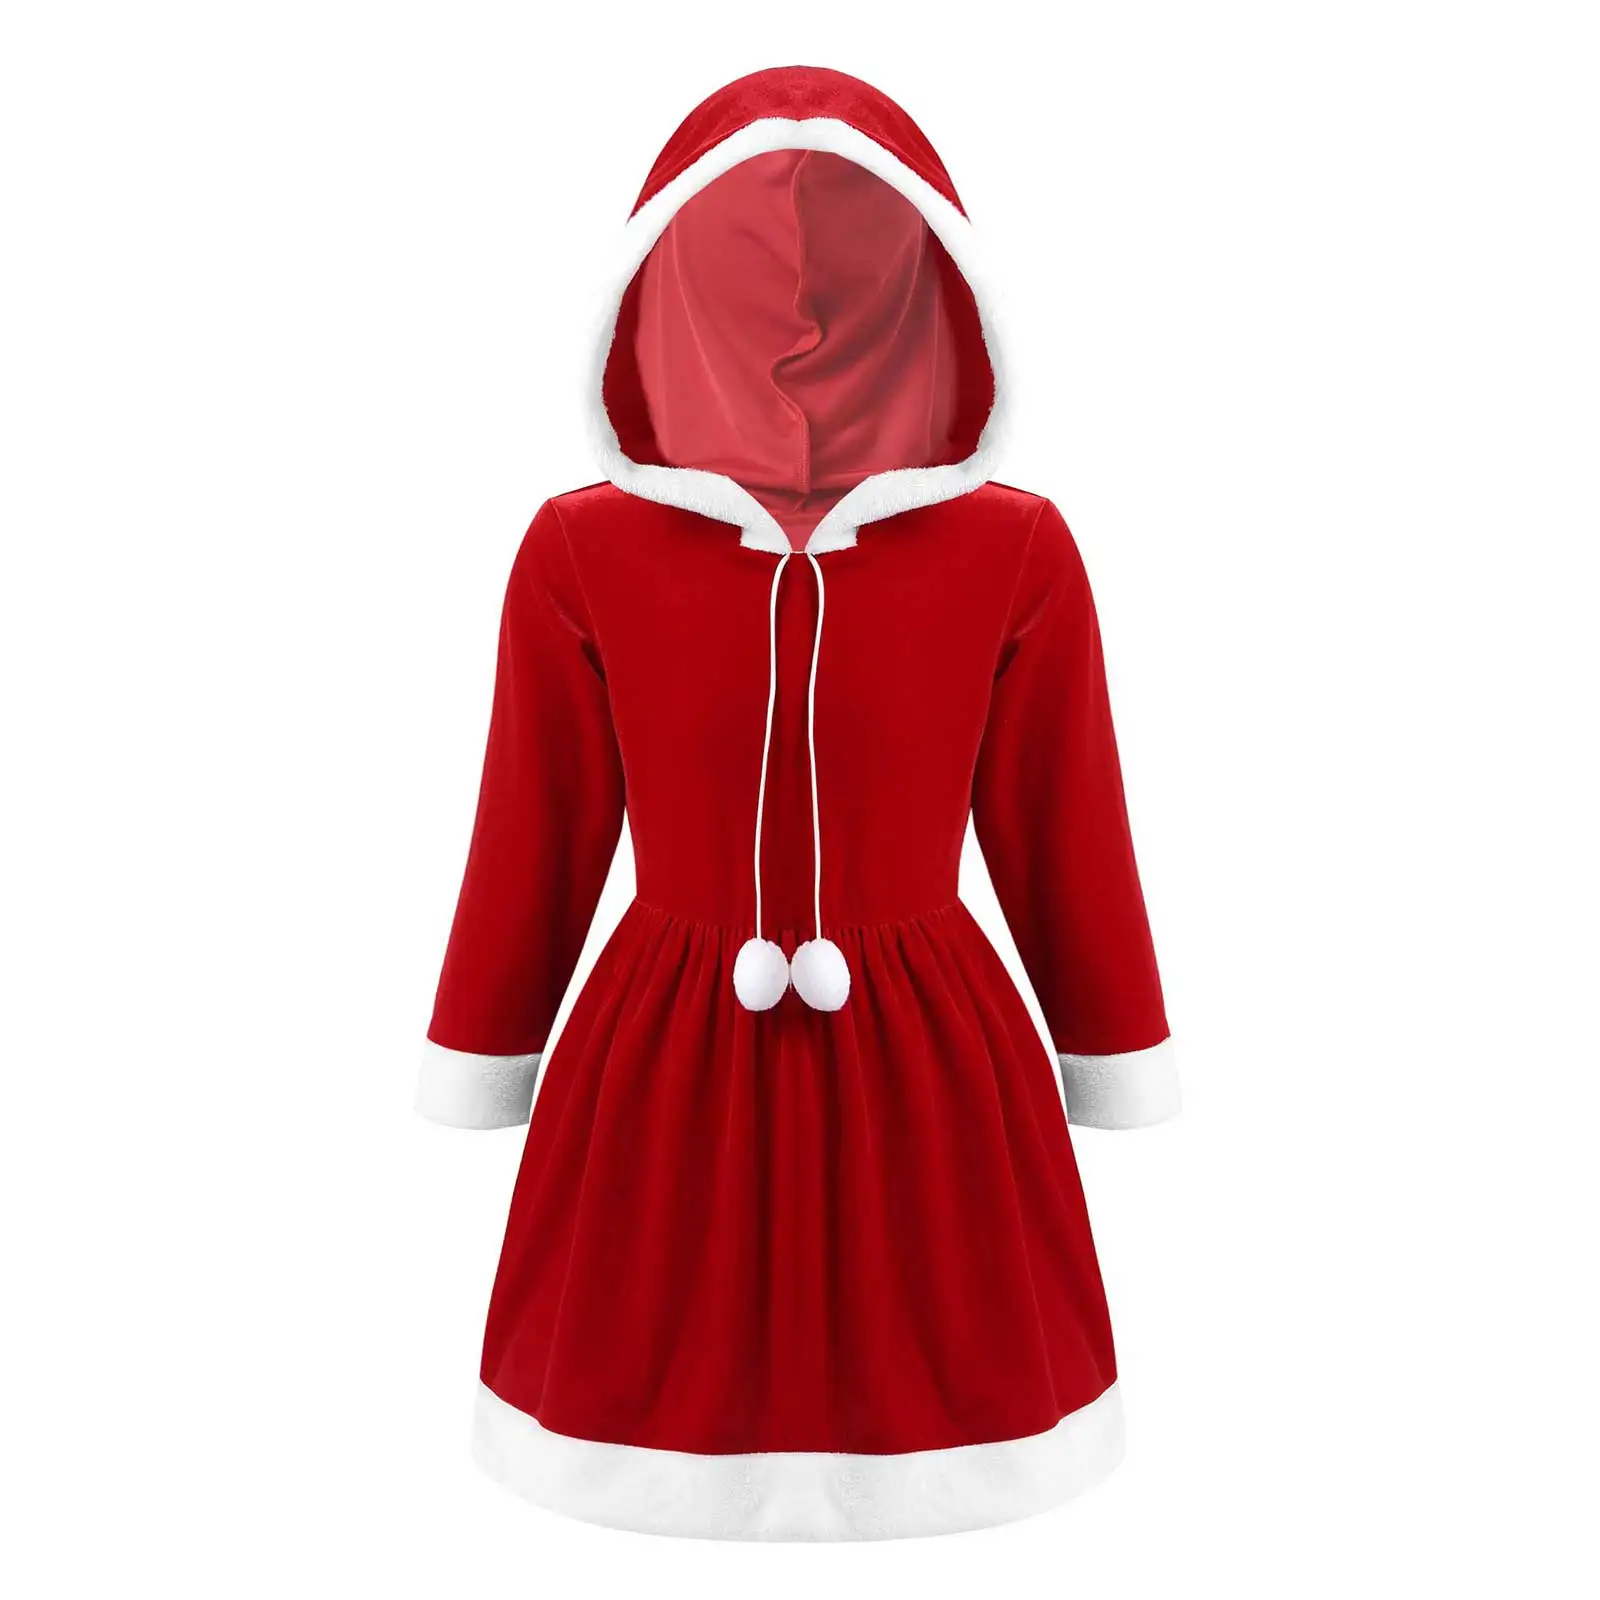 

Christmas Hooded Dresses for Kids Girls Mrs Santa Claus Party Fancy Dress Cosplay New Year Party Xmas Costumes Winter Outwear